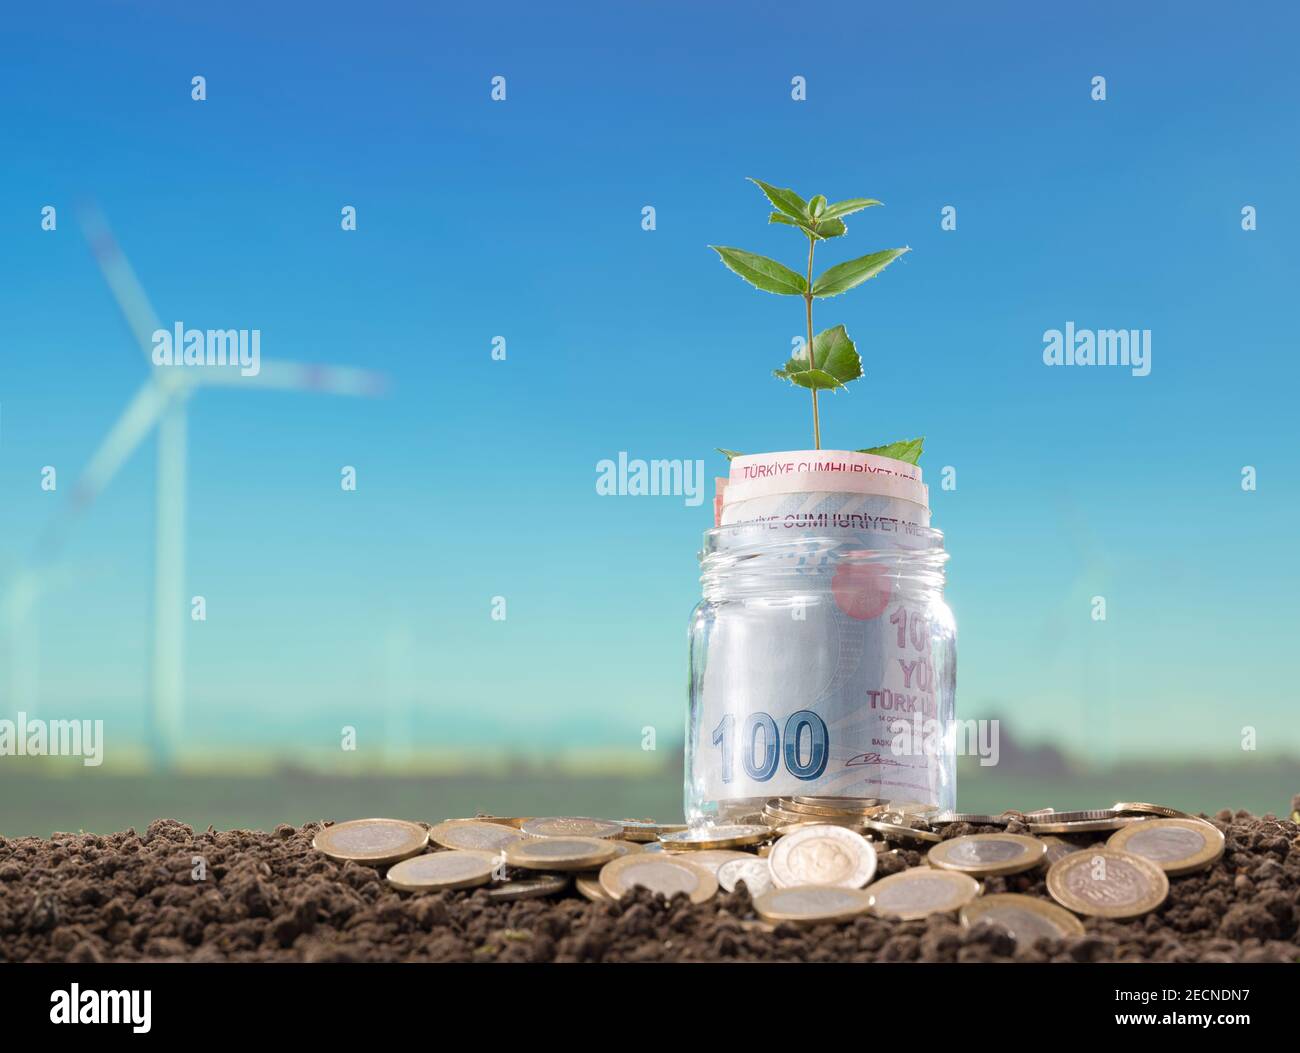 Turkish money and young plant in jar. Background of blurred wind roses and blue sky Stock Photo